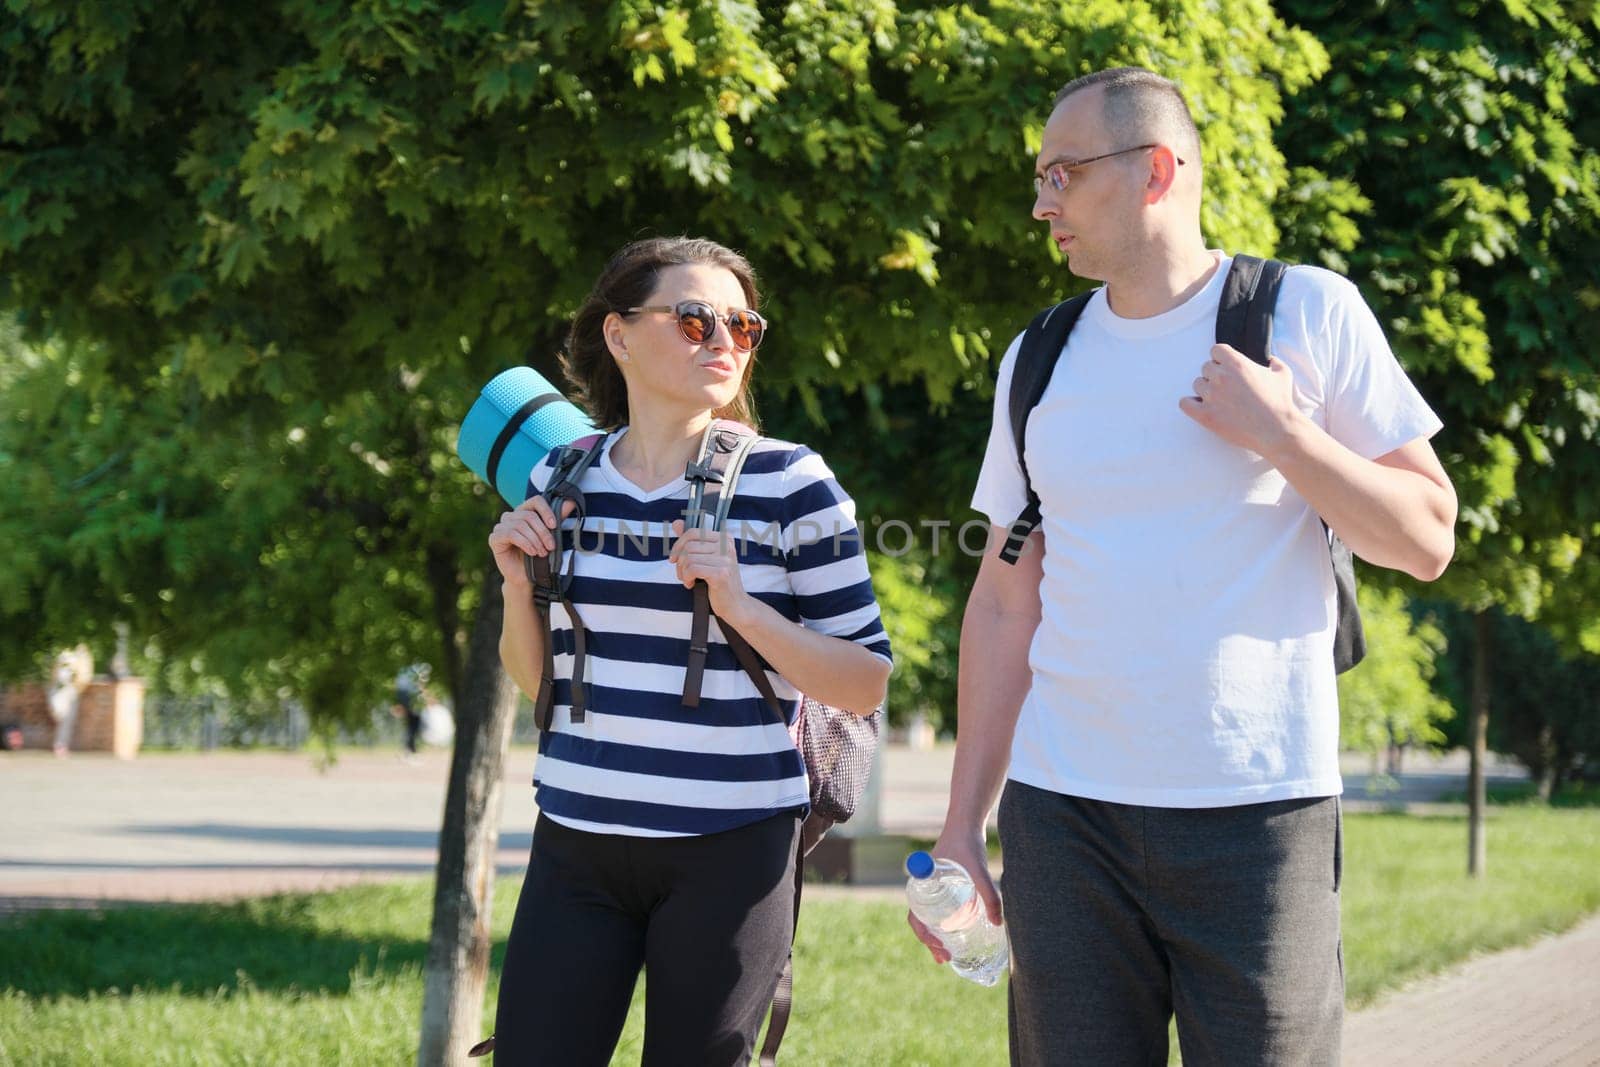 Talking middle-aged man and woman, couple walking along park road for sports fitness training, active healthy lifestyle and relationships of age 40 years old people